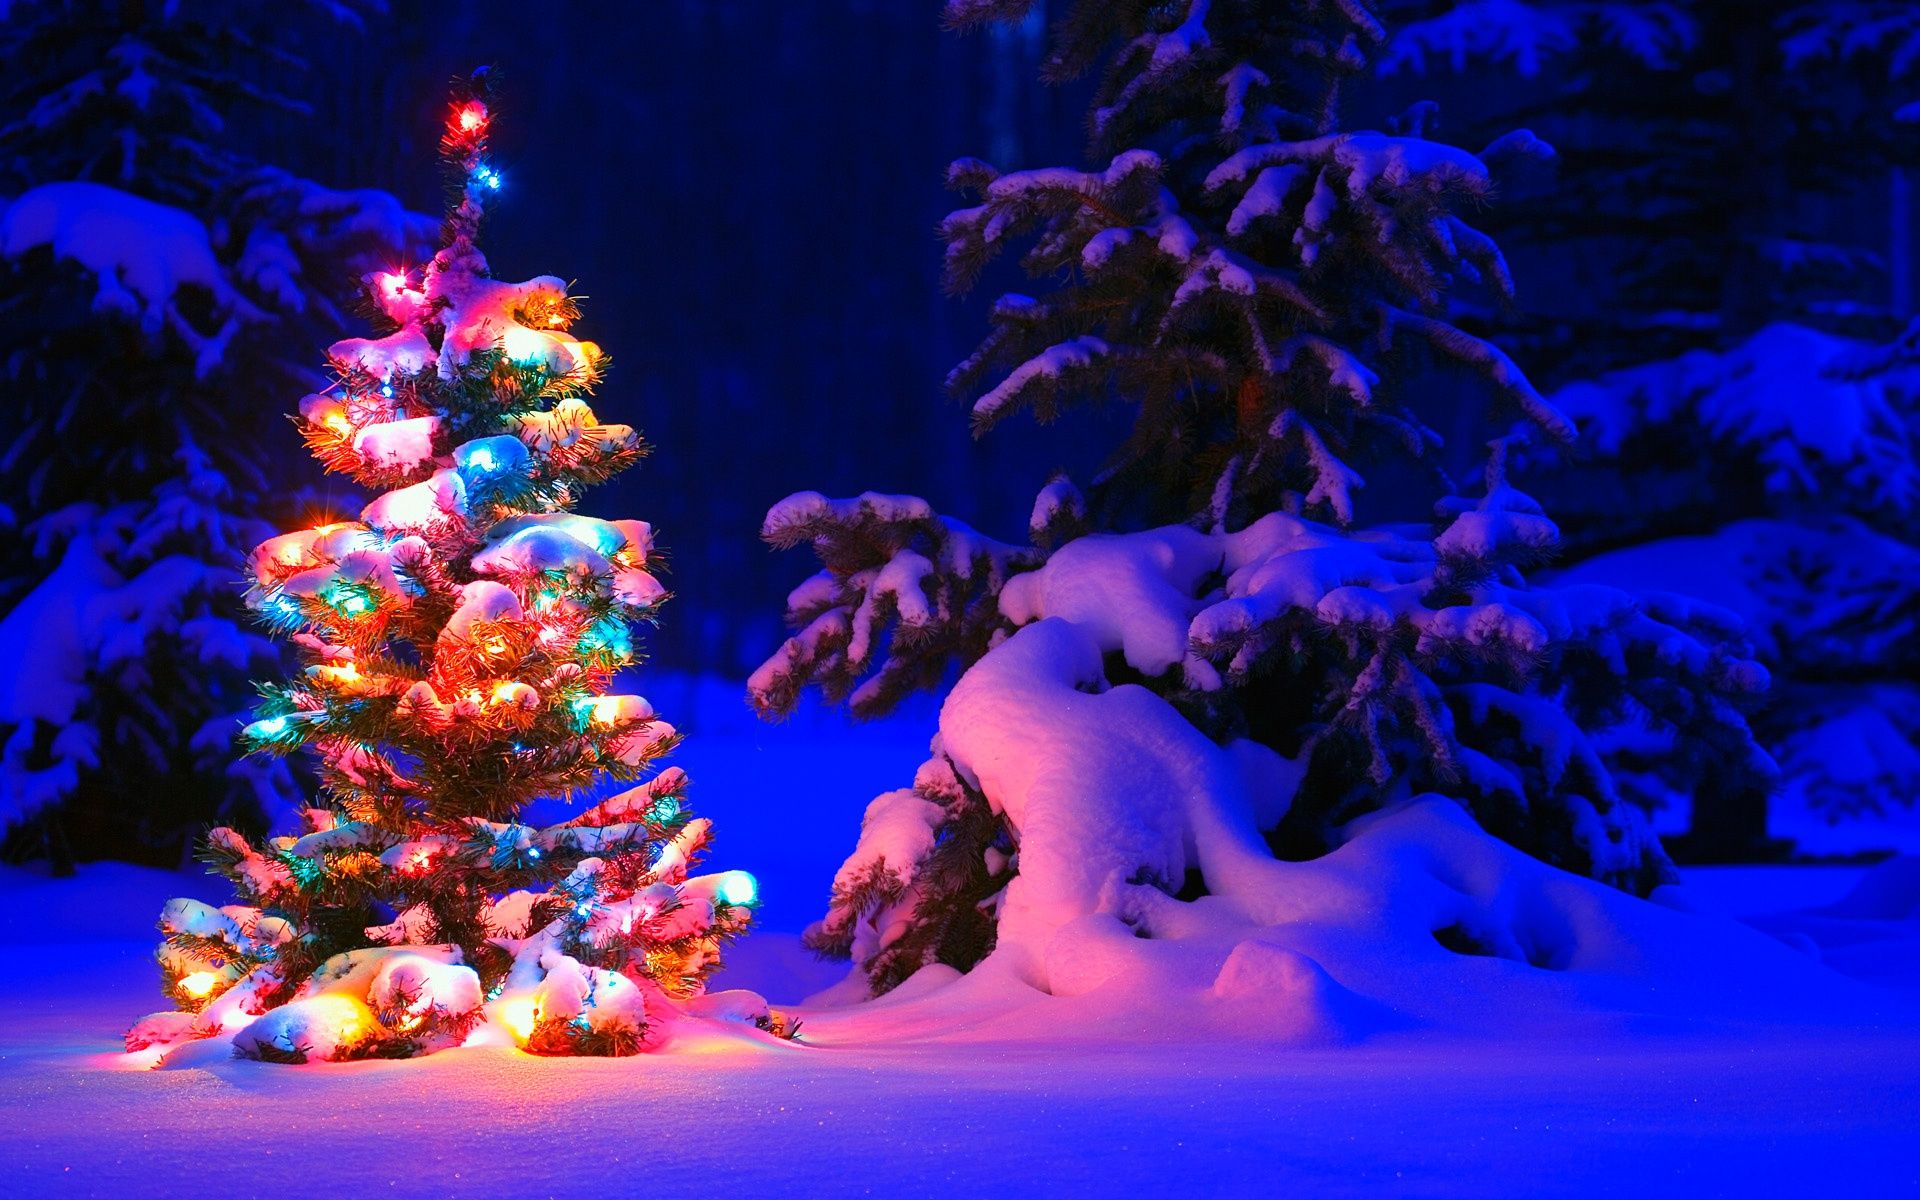 Snowy Christmas Tree Lights Wallpaper in jpg format for free download